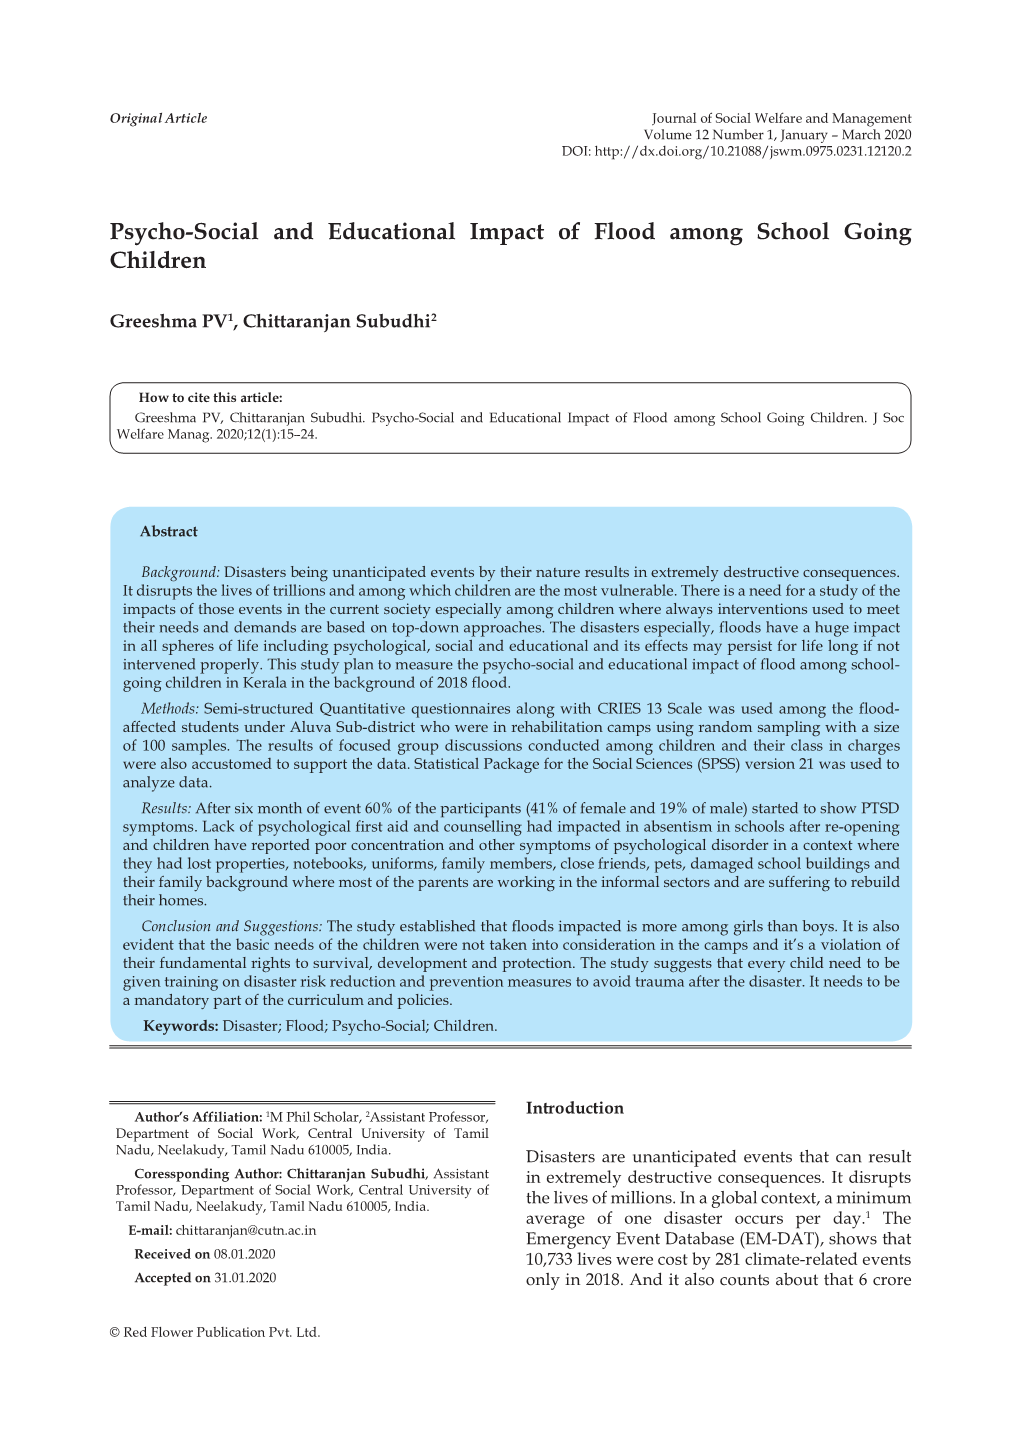 Psycho-Social and Educational Impact of Flood Among School Going Children